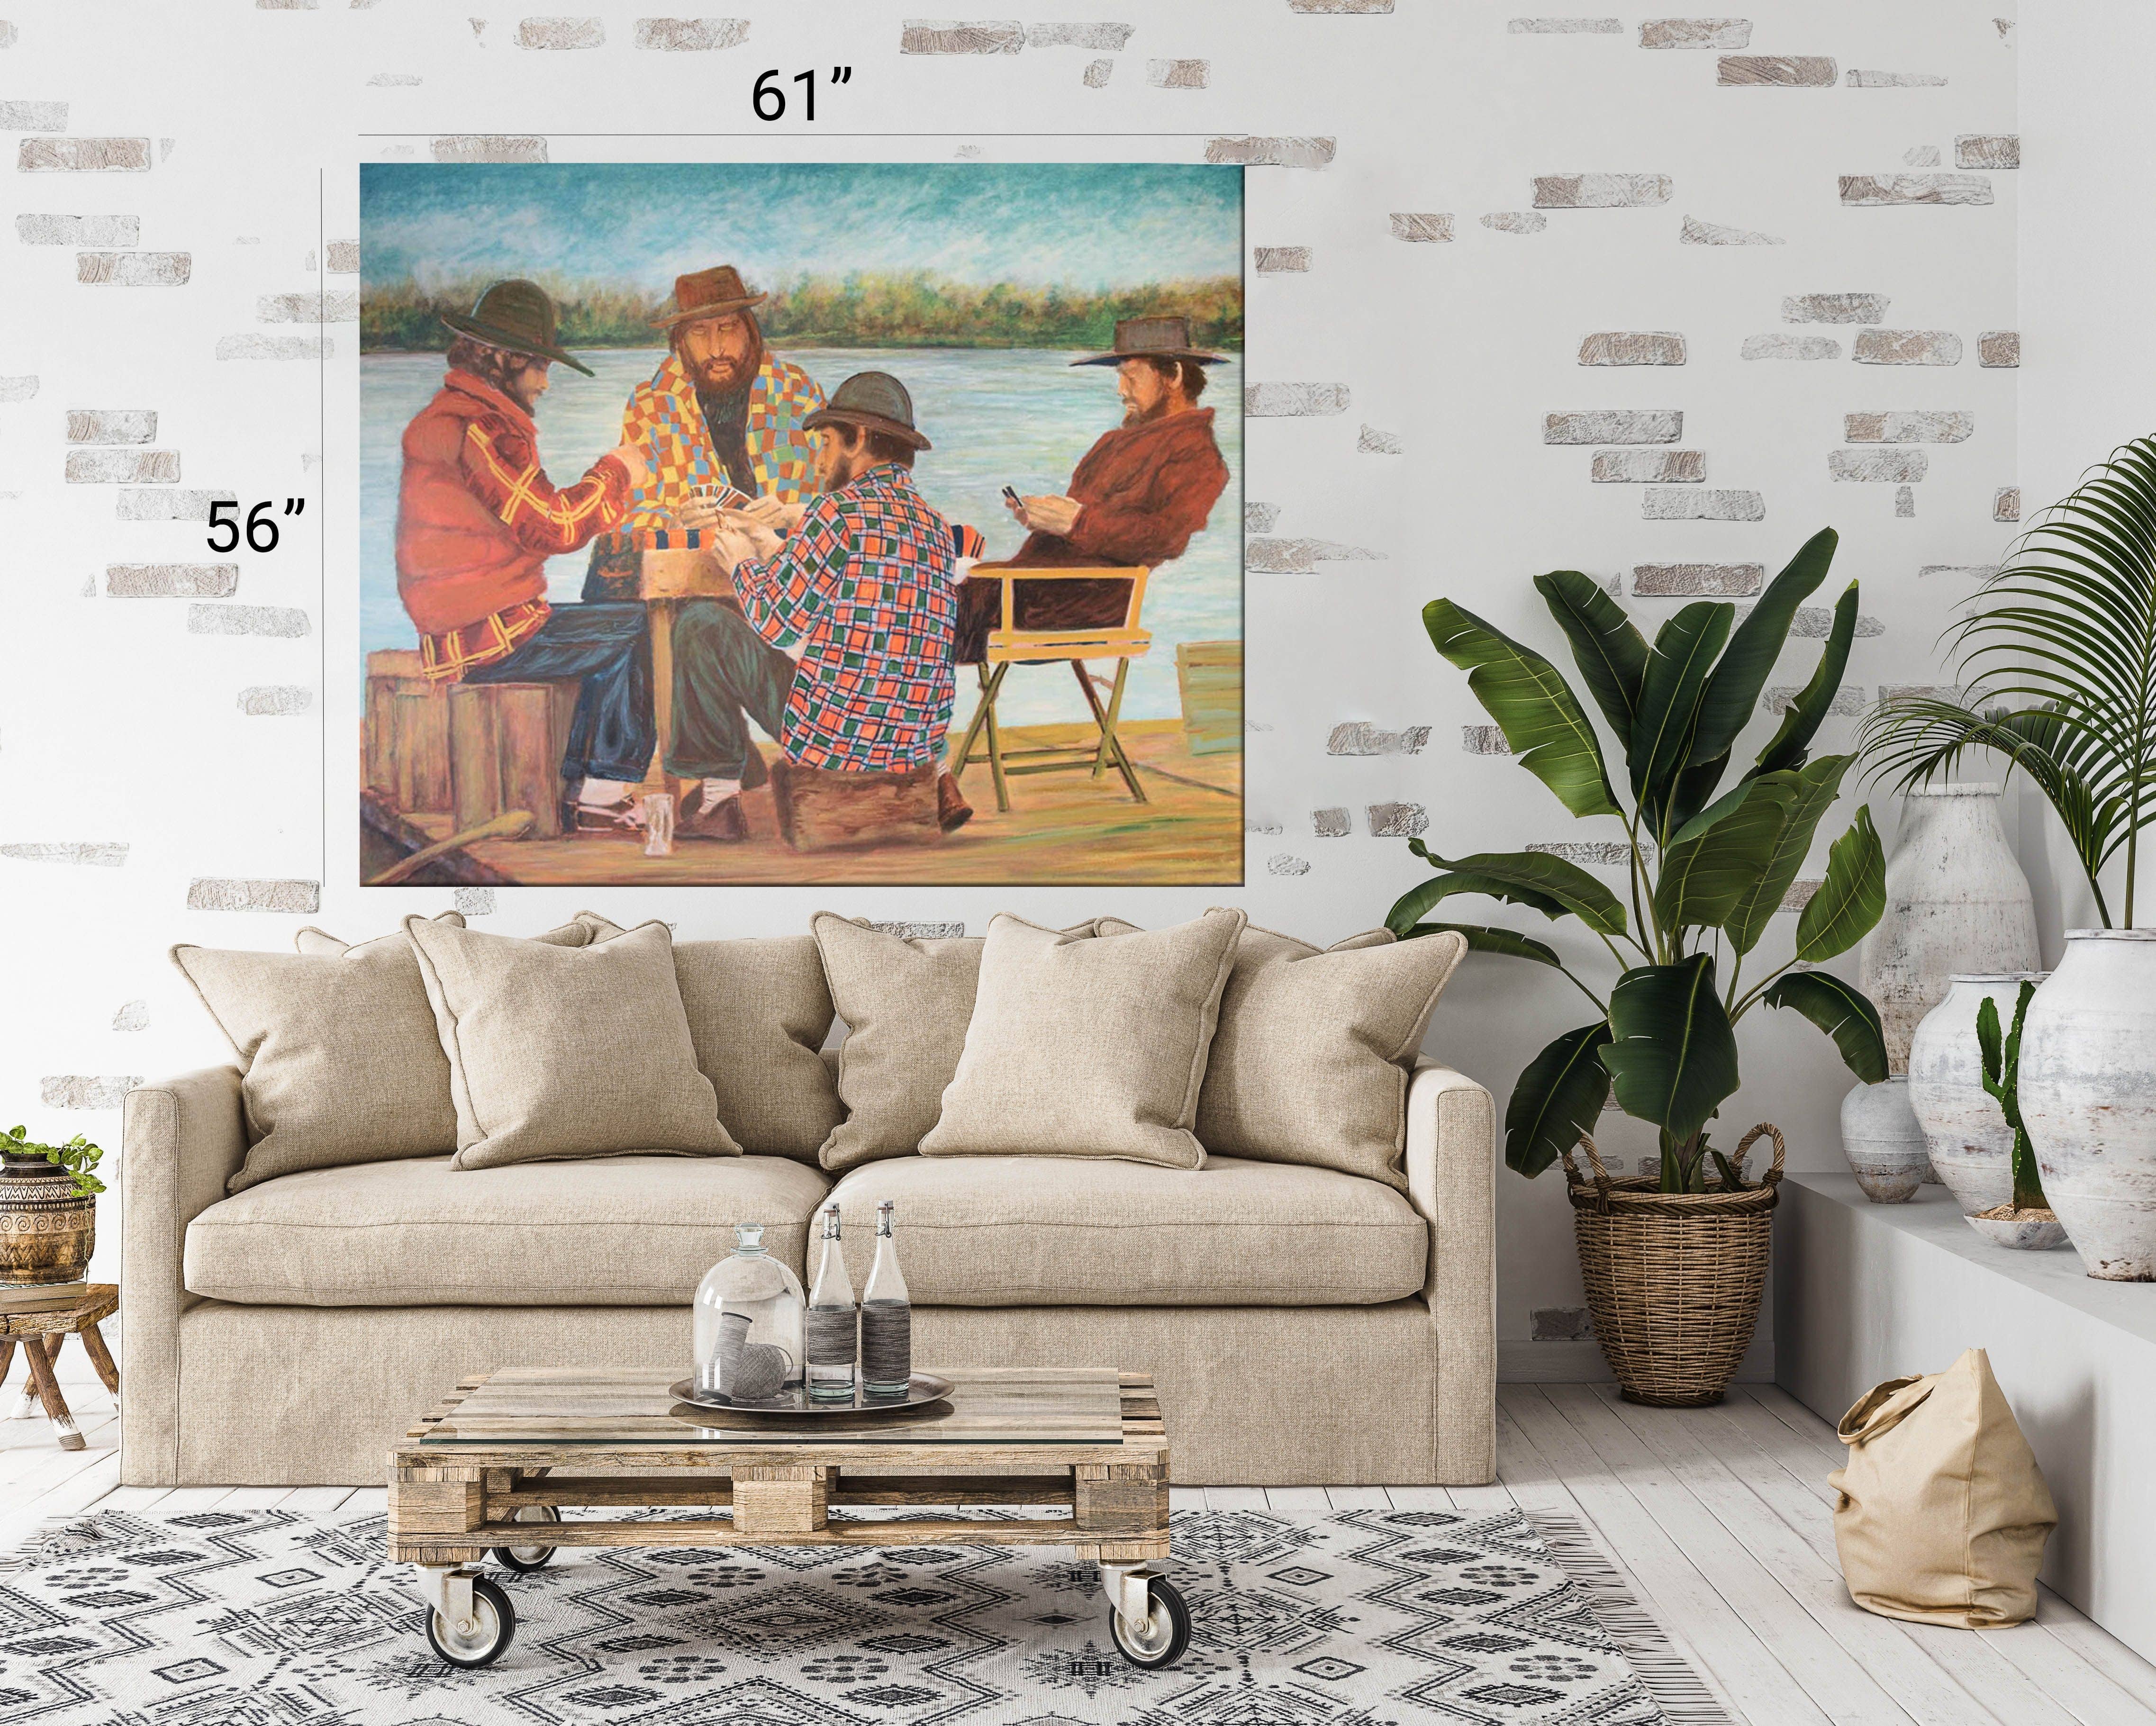 Painting of Jugadores de Cartas displayed in a rustic living room on the wall